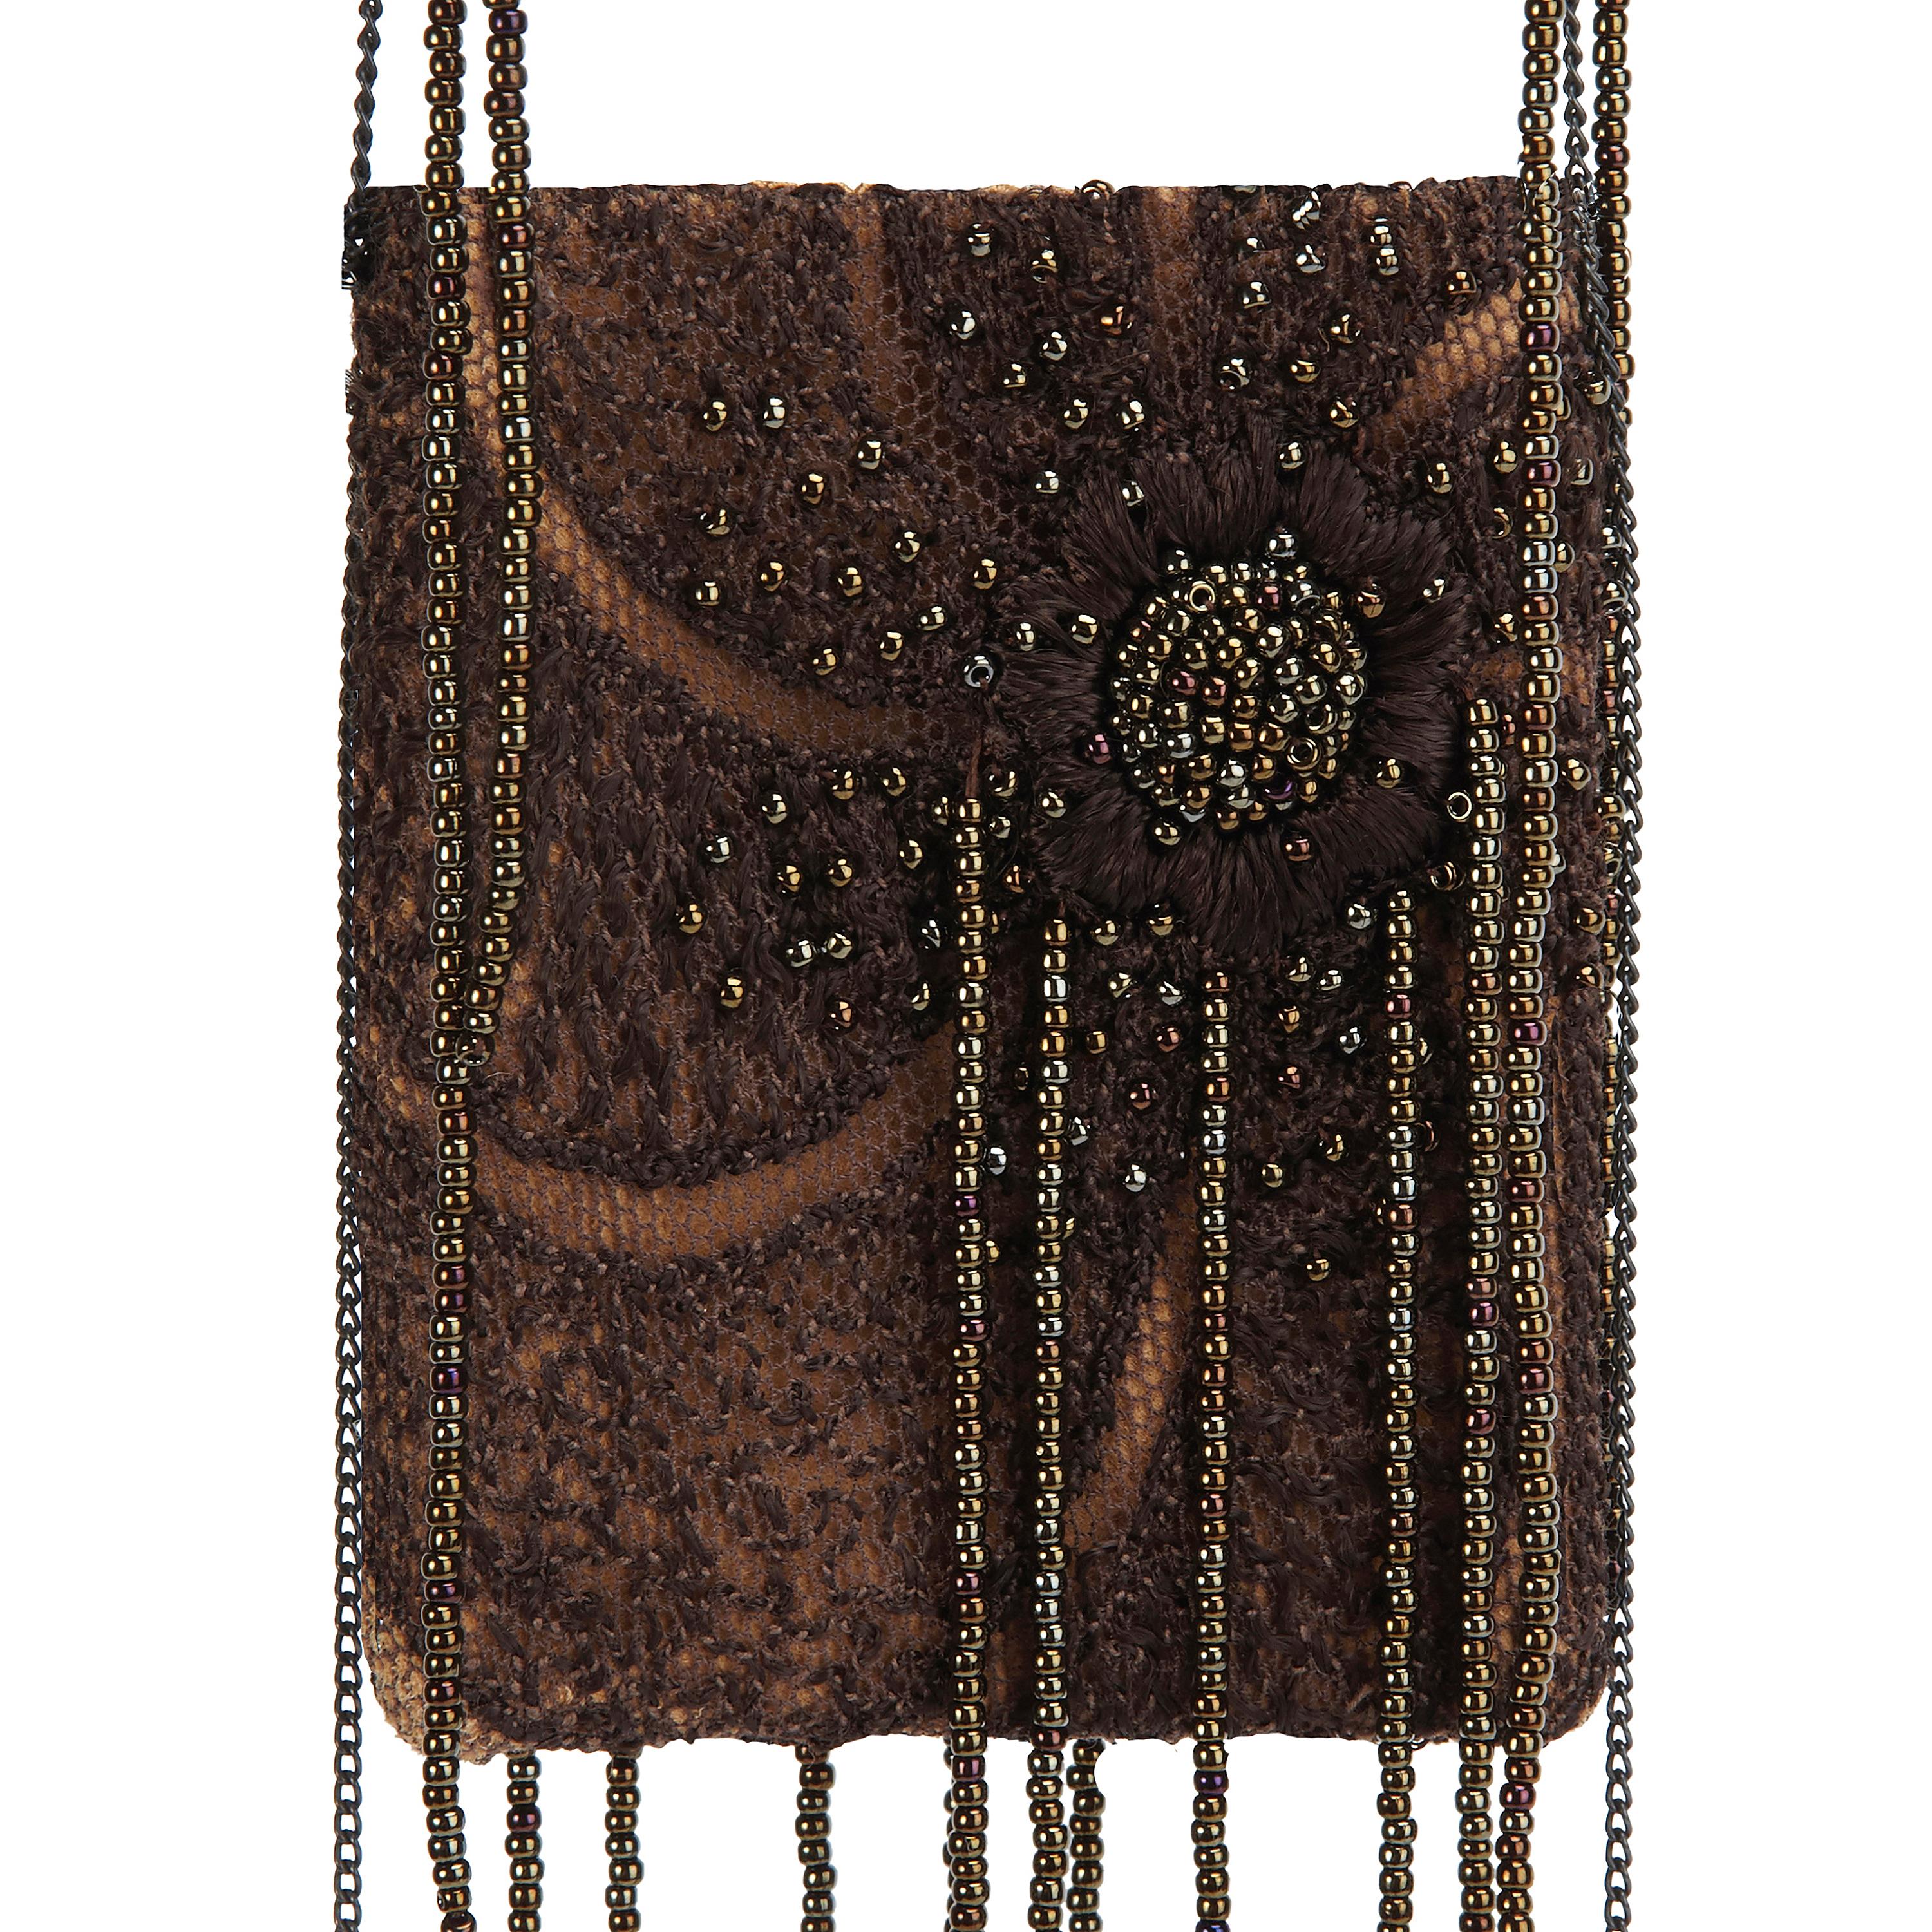 Product Details: Vanda Smith - Beaded Antique Lace Wrist Bag - Bracelet Cuff - One-Off Piece - Delicate Hand Beading & Gunmetal Chain + Beaded Tassels Throughout - Suede Pocket Bag & Necklace + 1930s Vintage Antique Lace Top Layer - Detachable